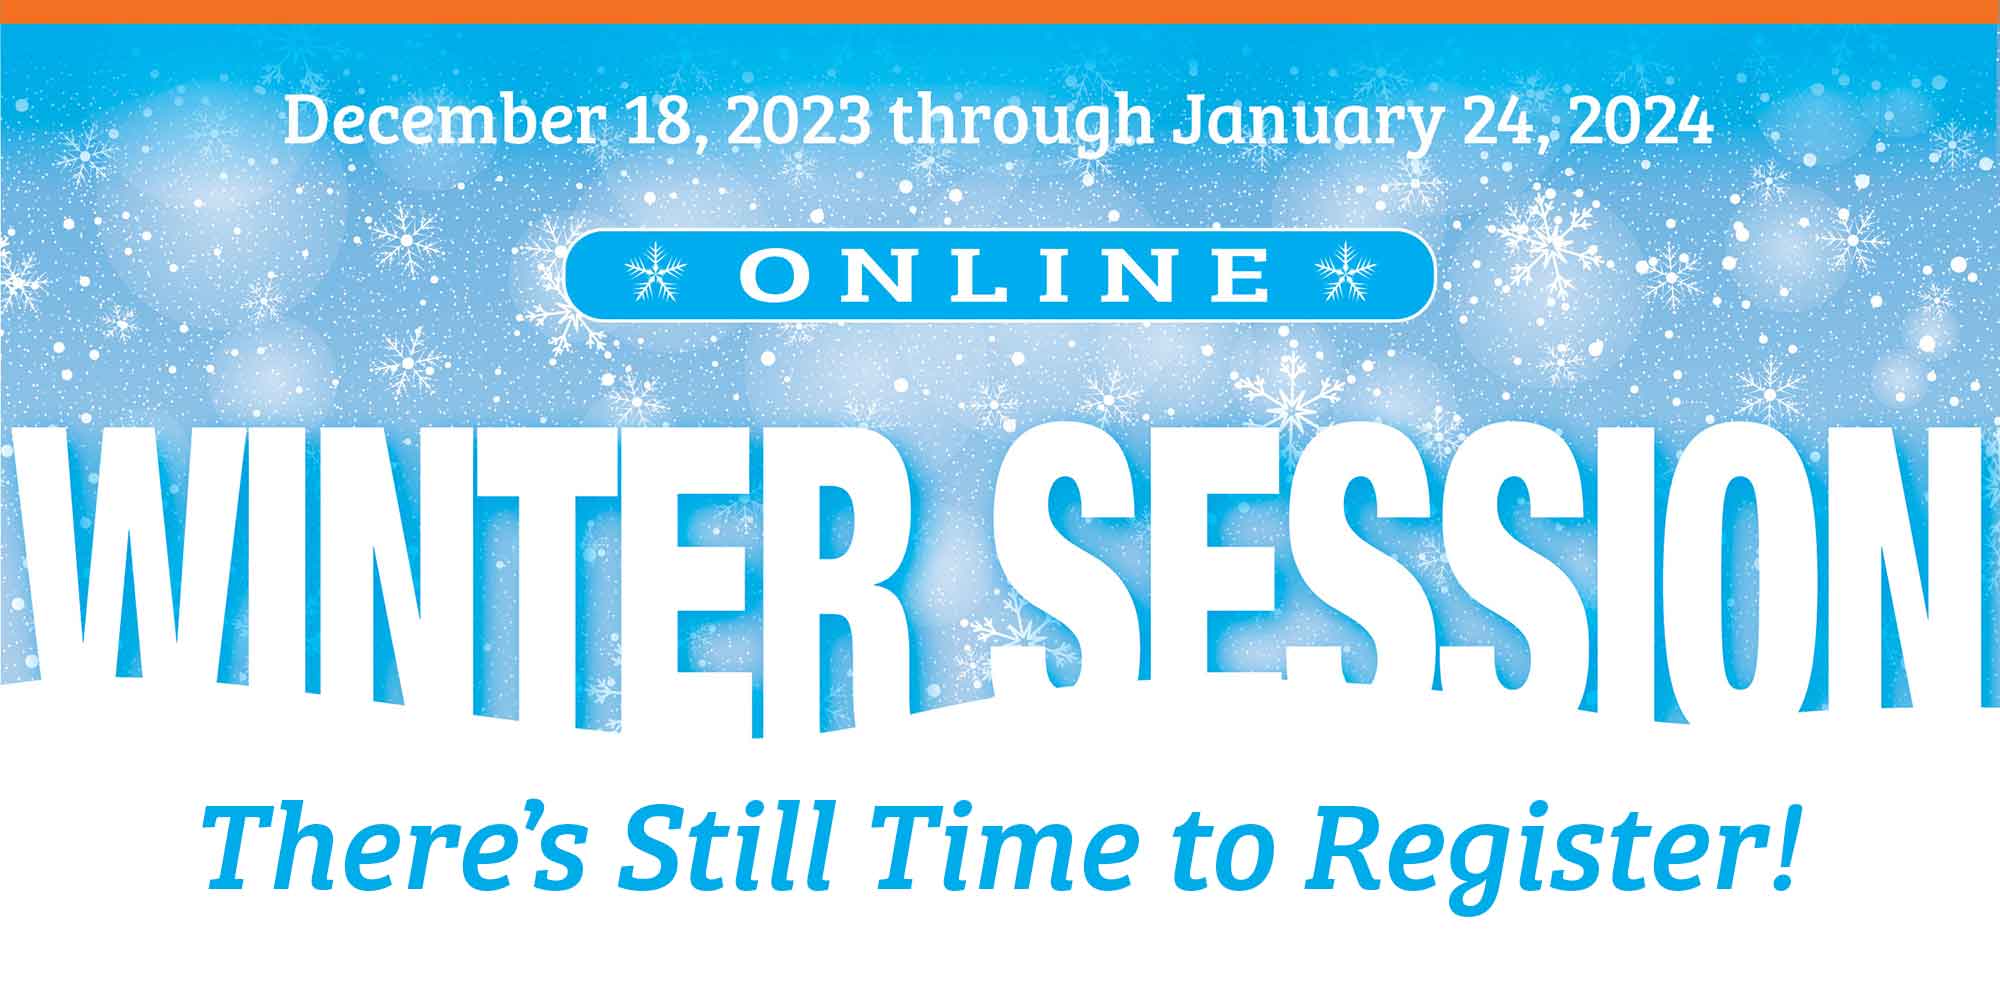 Get ahead in your college journey with an online winter course